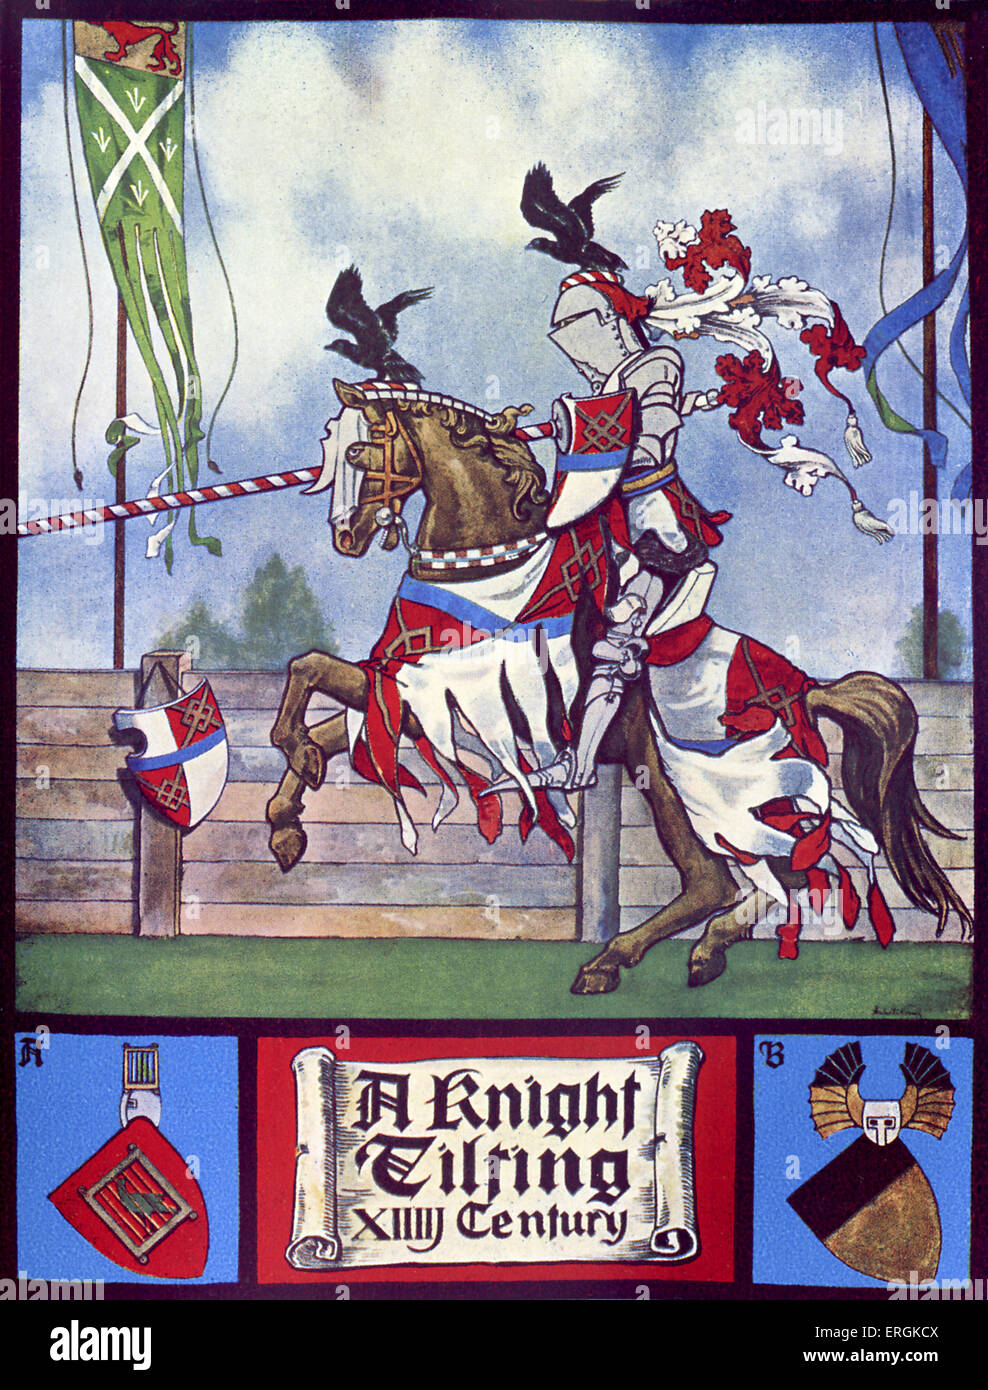 14th century knight jousting for sport. Caption reads 'A Knight Tilting'.  Herbert Norris atist  died 1950 - may require Stock Photo